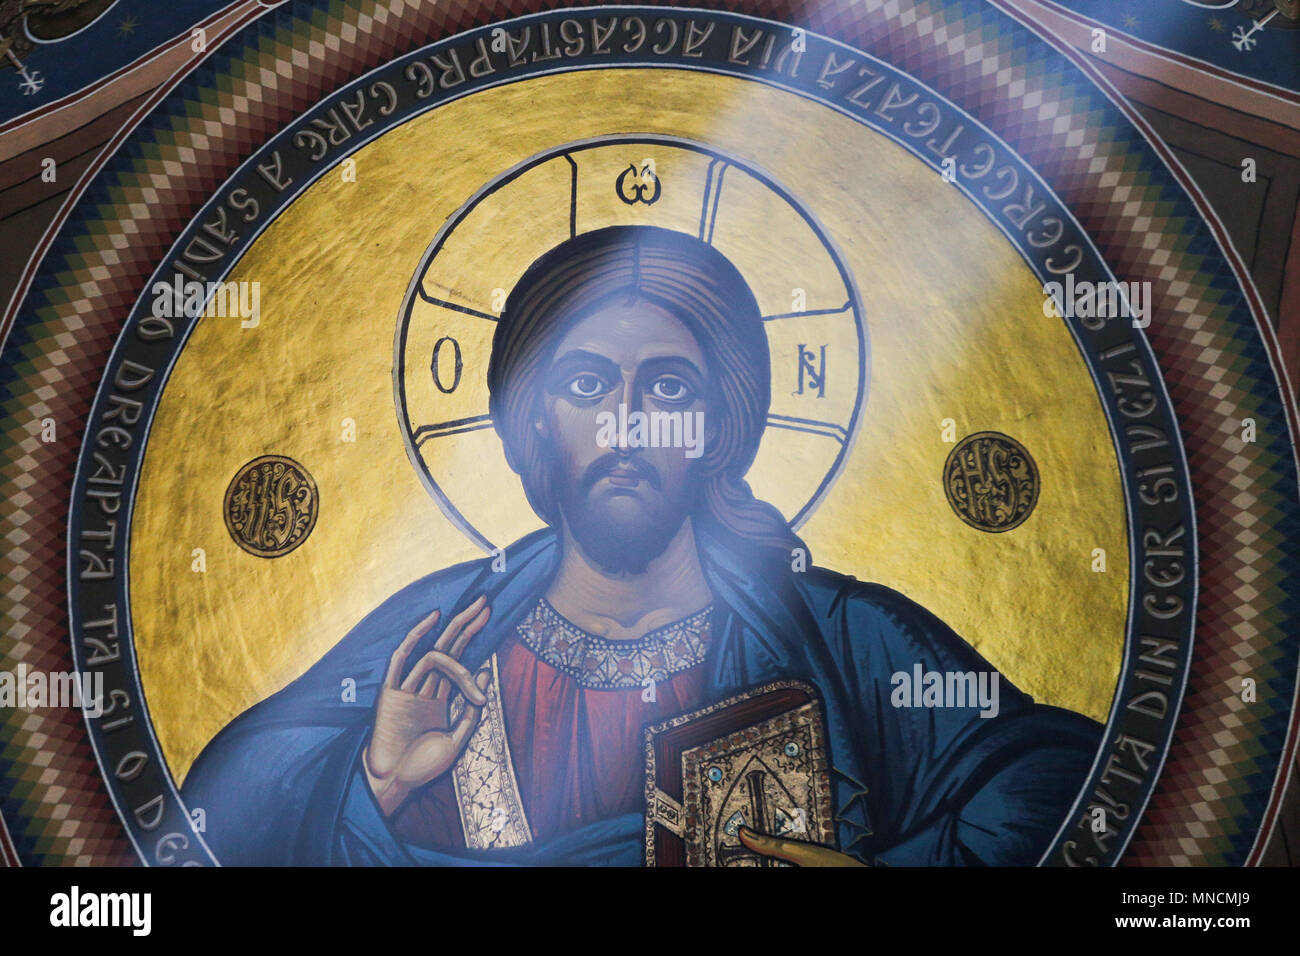 BUCHAREST, ROMANIA - APRIL 27, 2018: Painting of Jesus Pantocratoros, Ruler of the Universe, on the Dome of the Christian Orthodox Church Saint Ioan Stock Photo